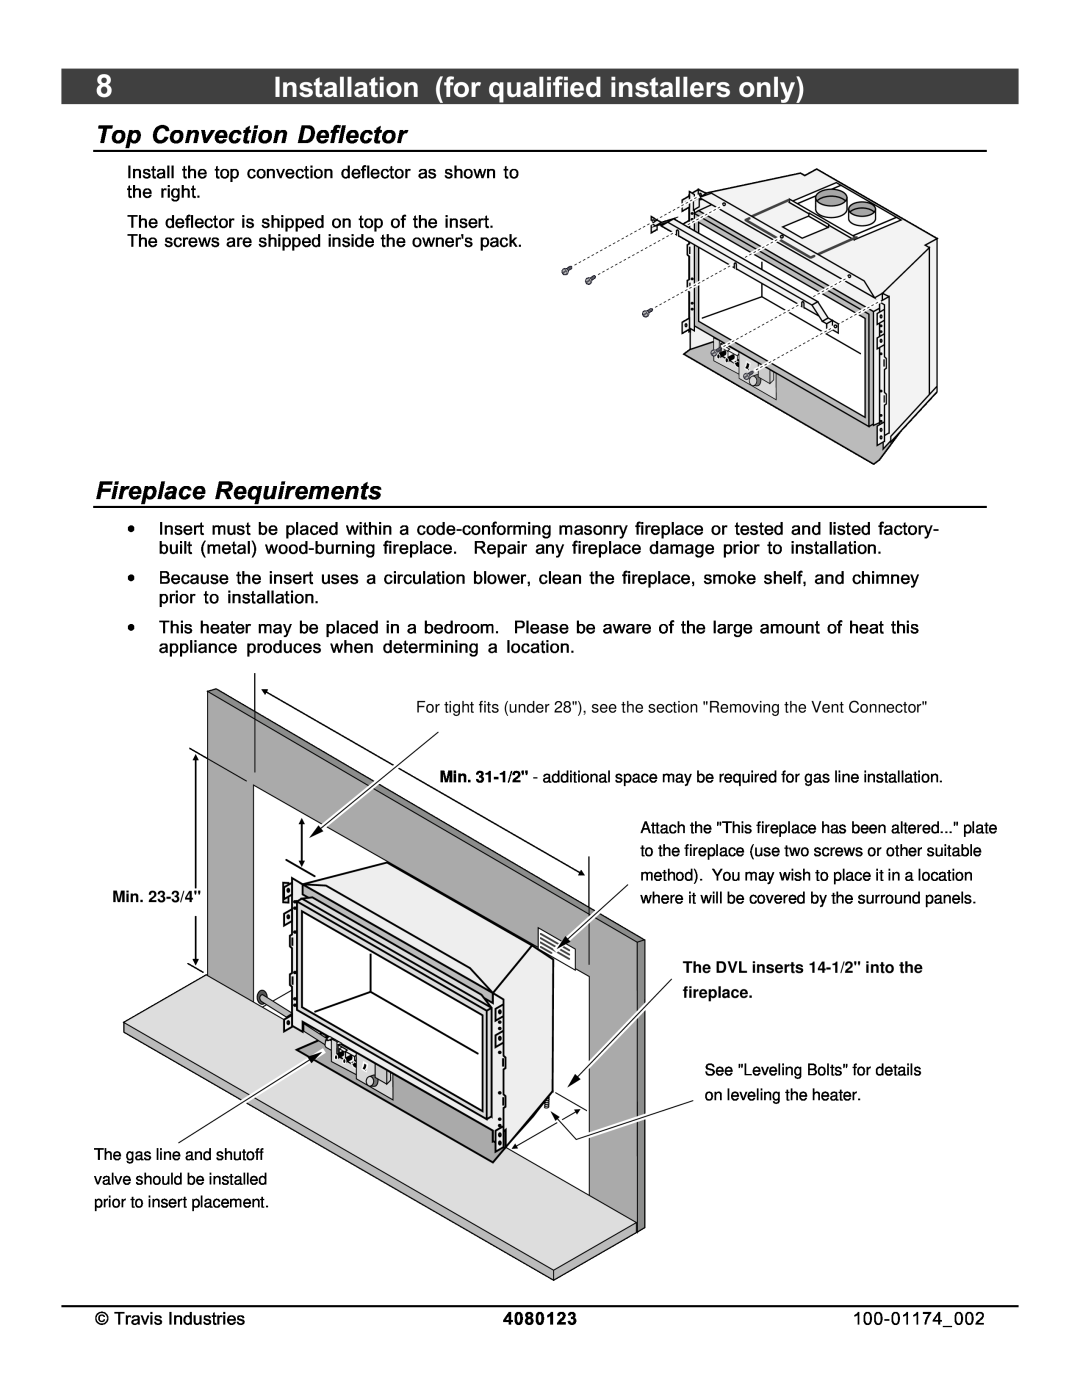 Avalon Stoves DVL Insert EF II owner manual Top Convection Deflector, Fireplace Requirements, 4080123 